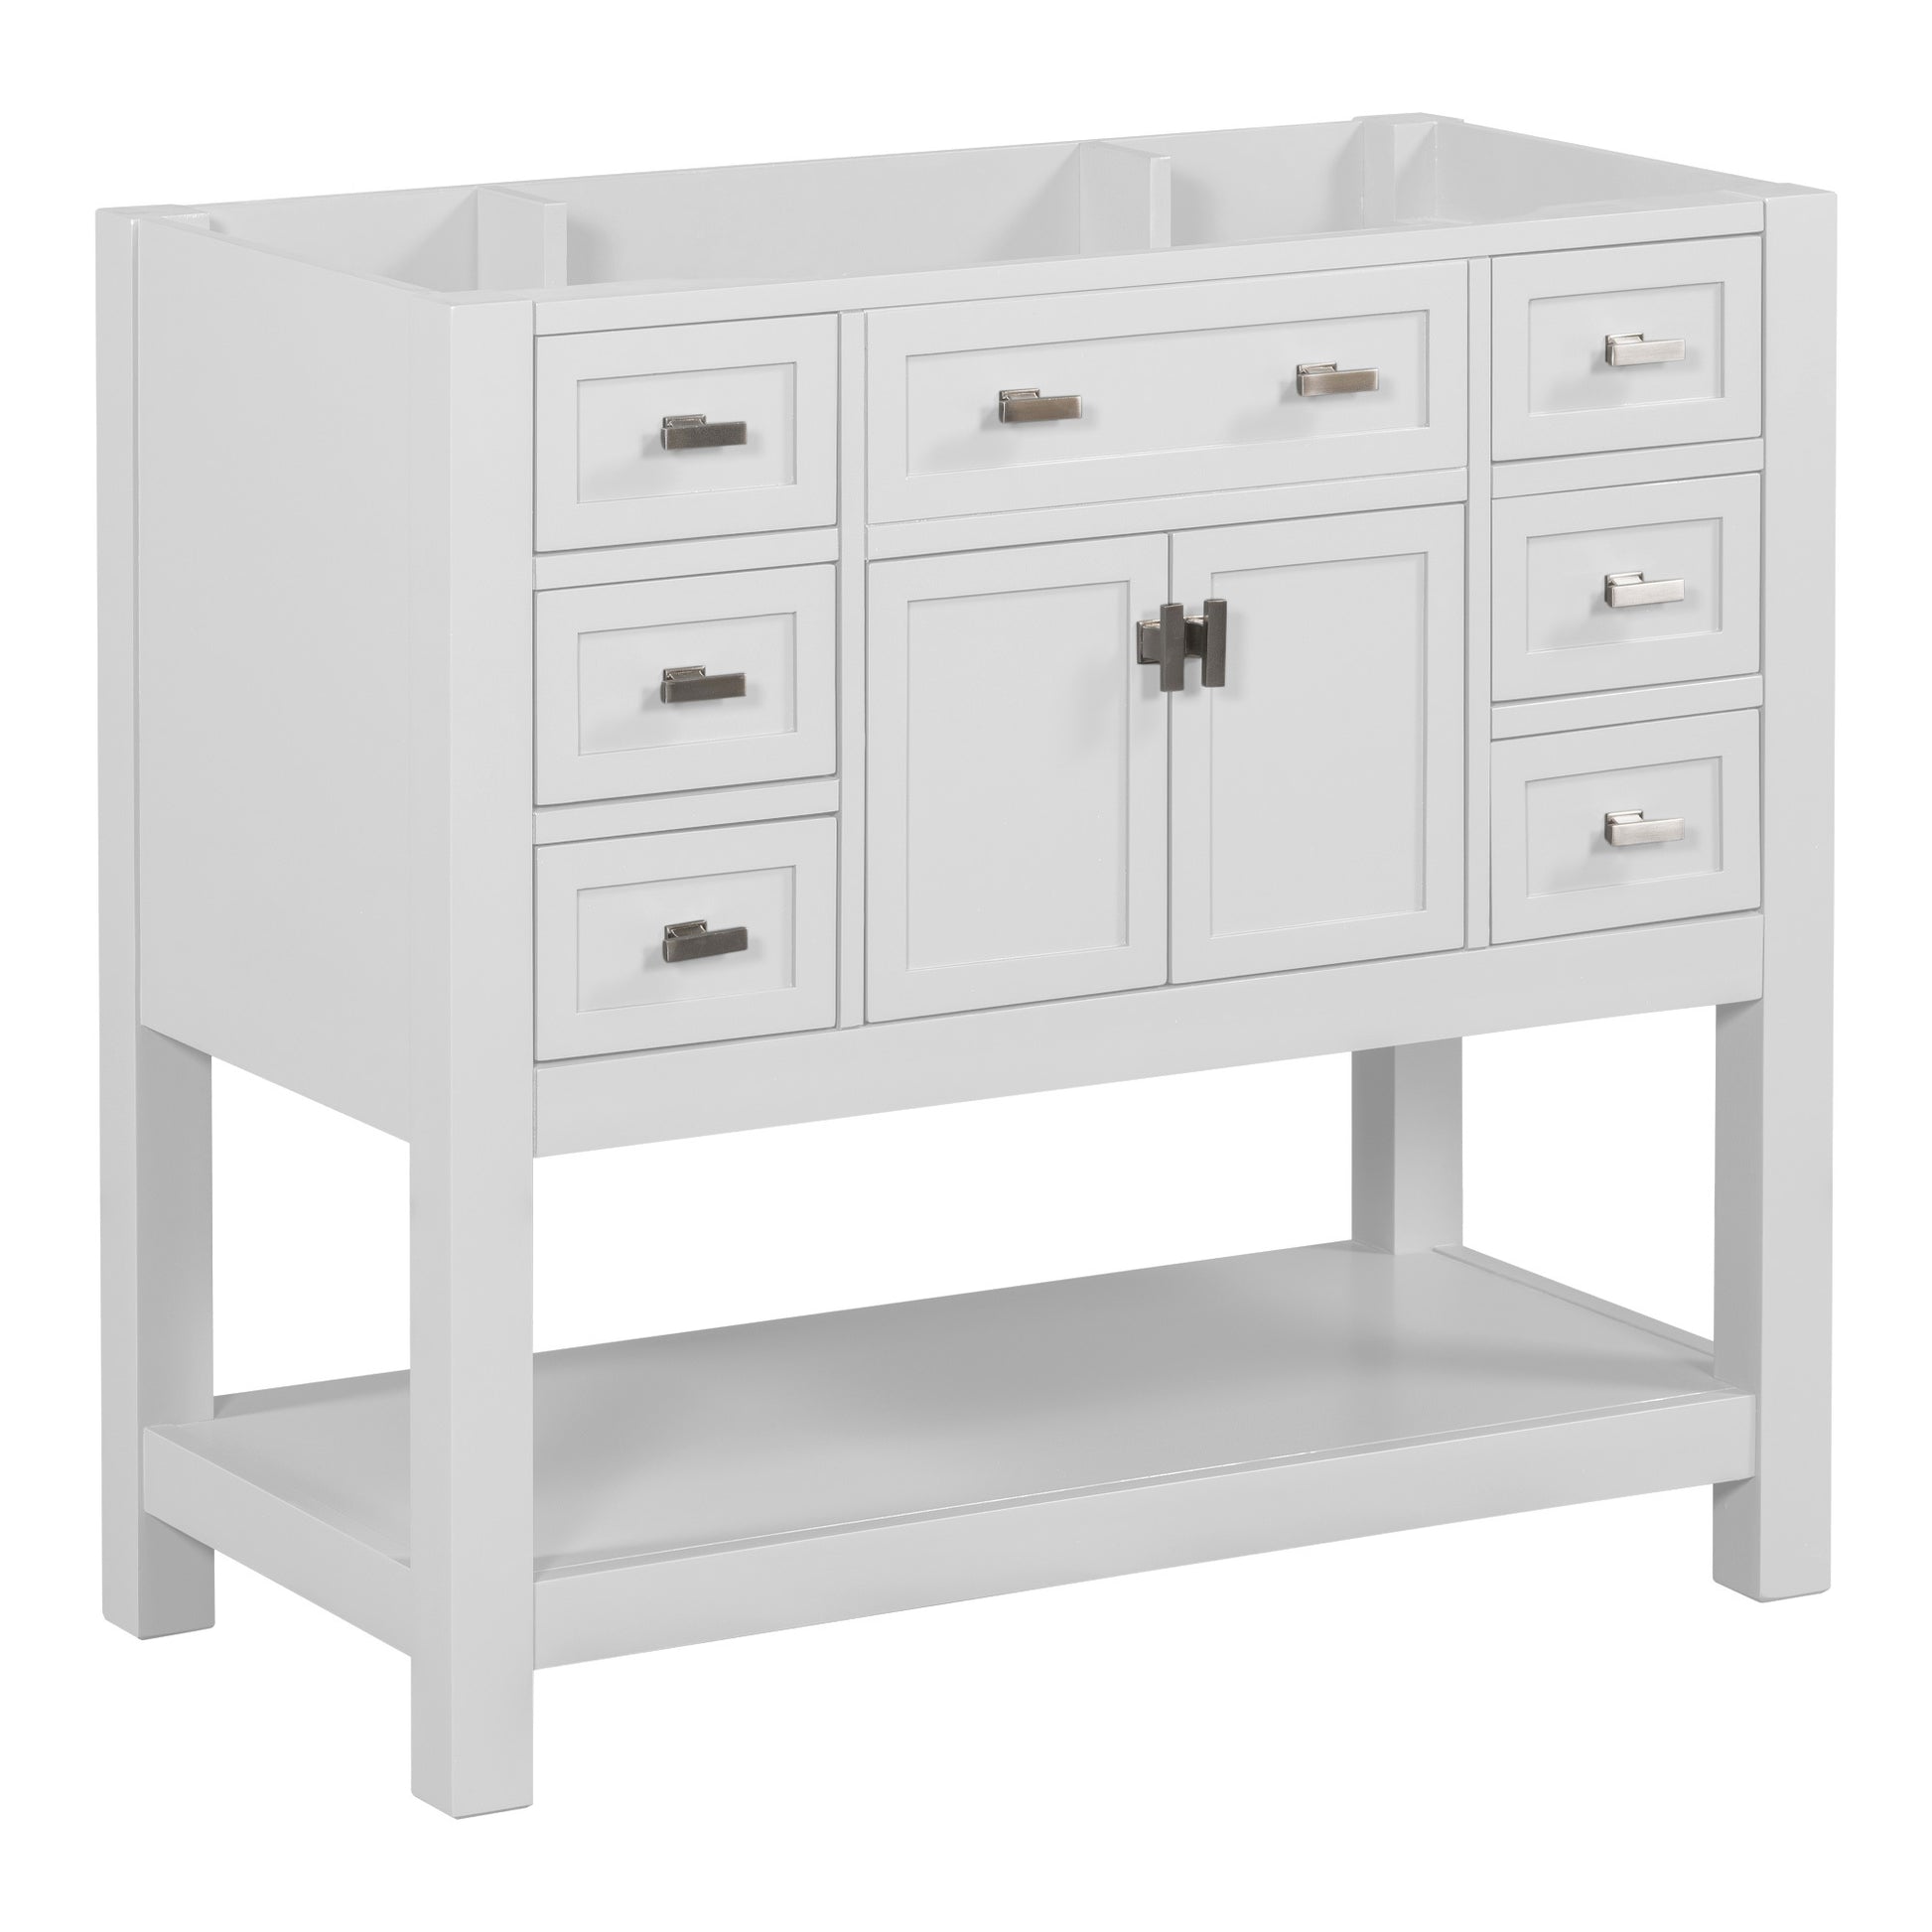 36'' Bathroom Vanity without Top Sink, White Cabinet 4+-white-2-1-soft close